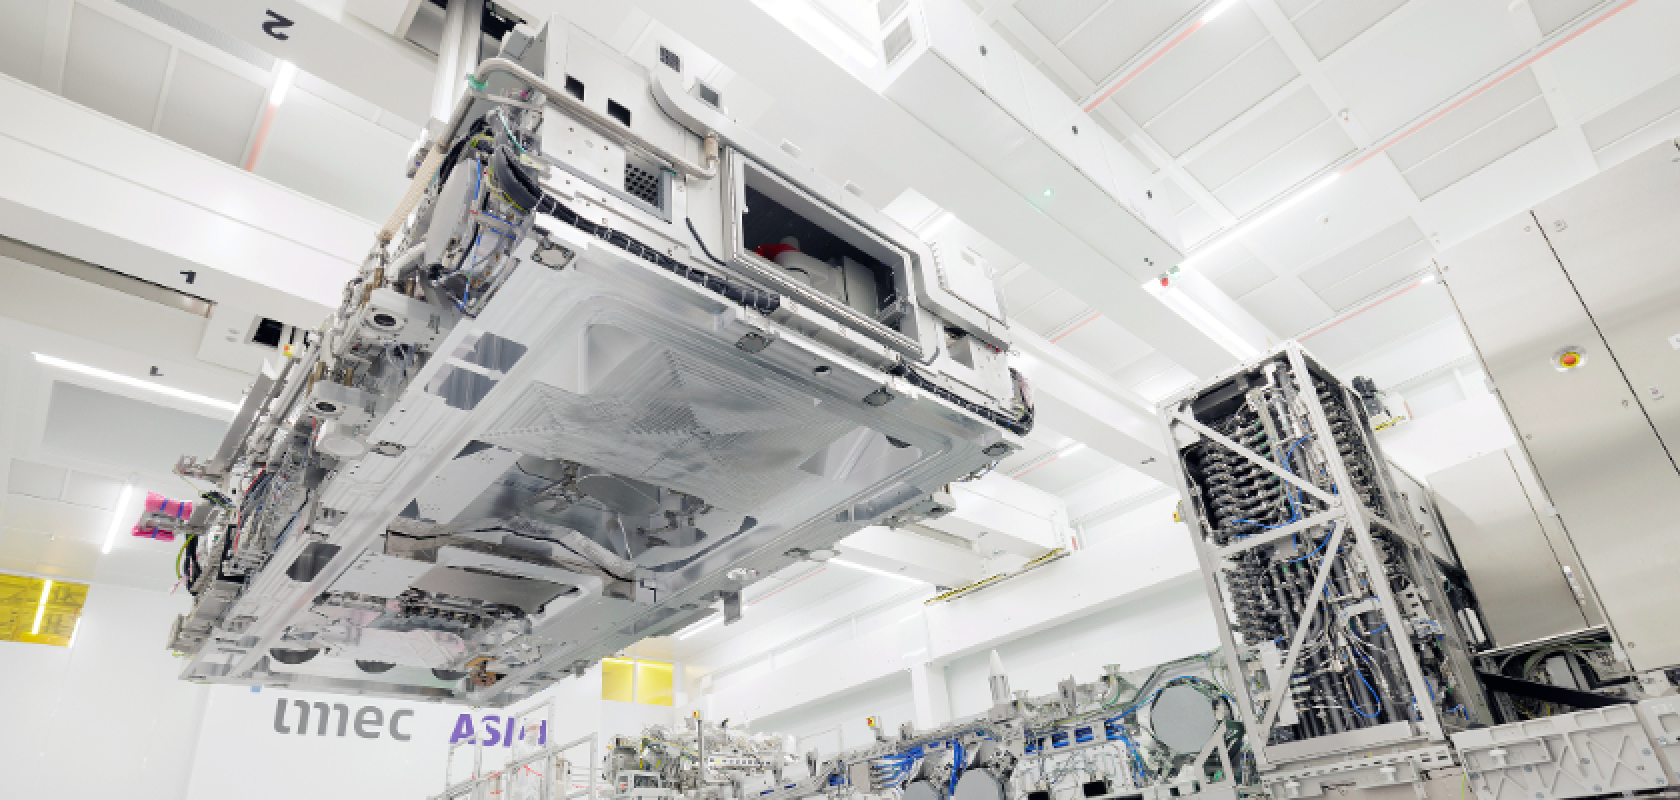 The high-NA EUV lab is enabling the hub to produce learnings for the benefit of customers and future research (Image: ASML)